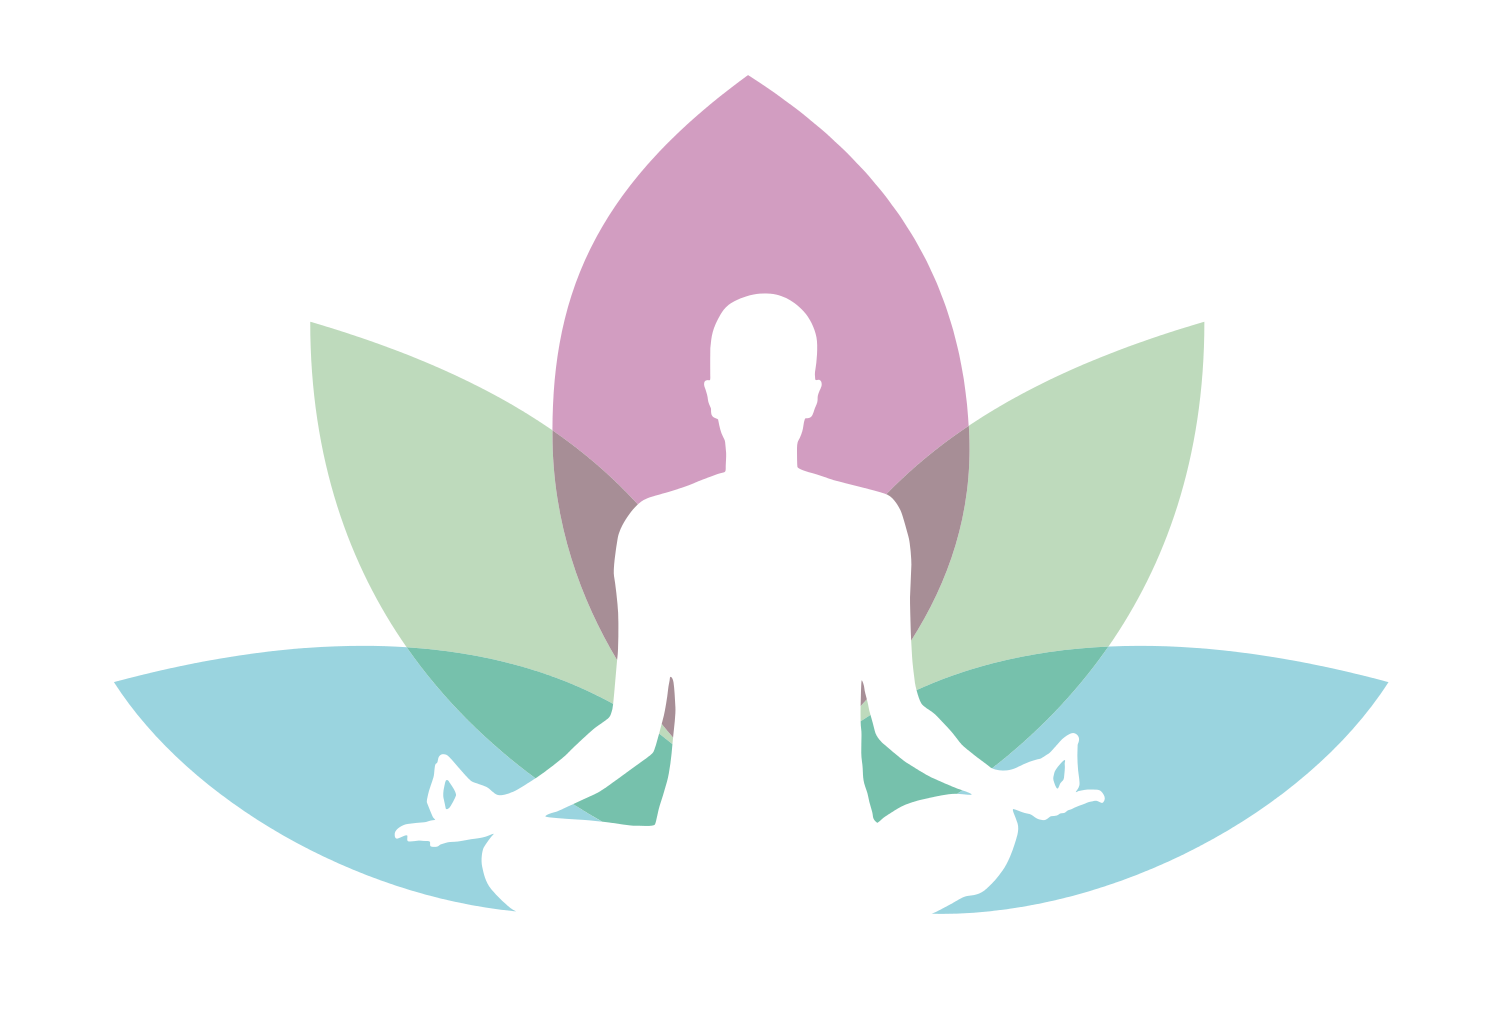 Meditation clipart peaceful. Png transparent images all